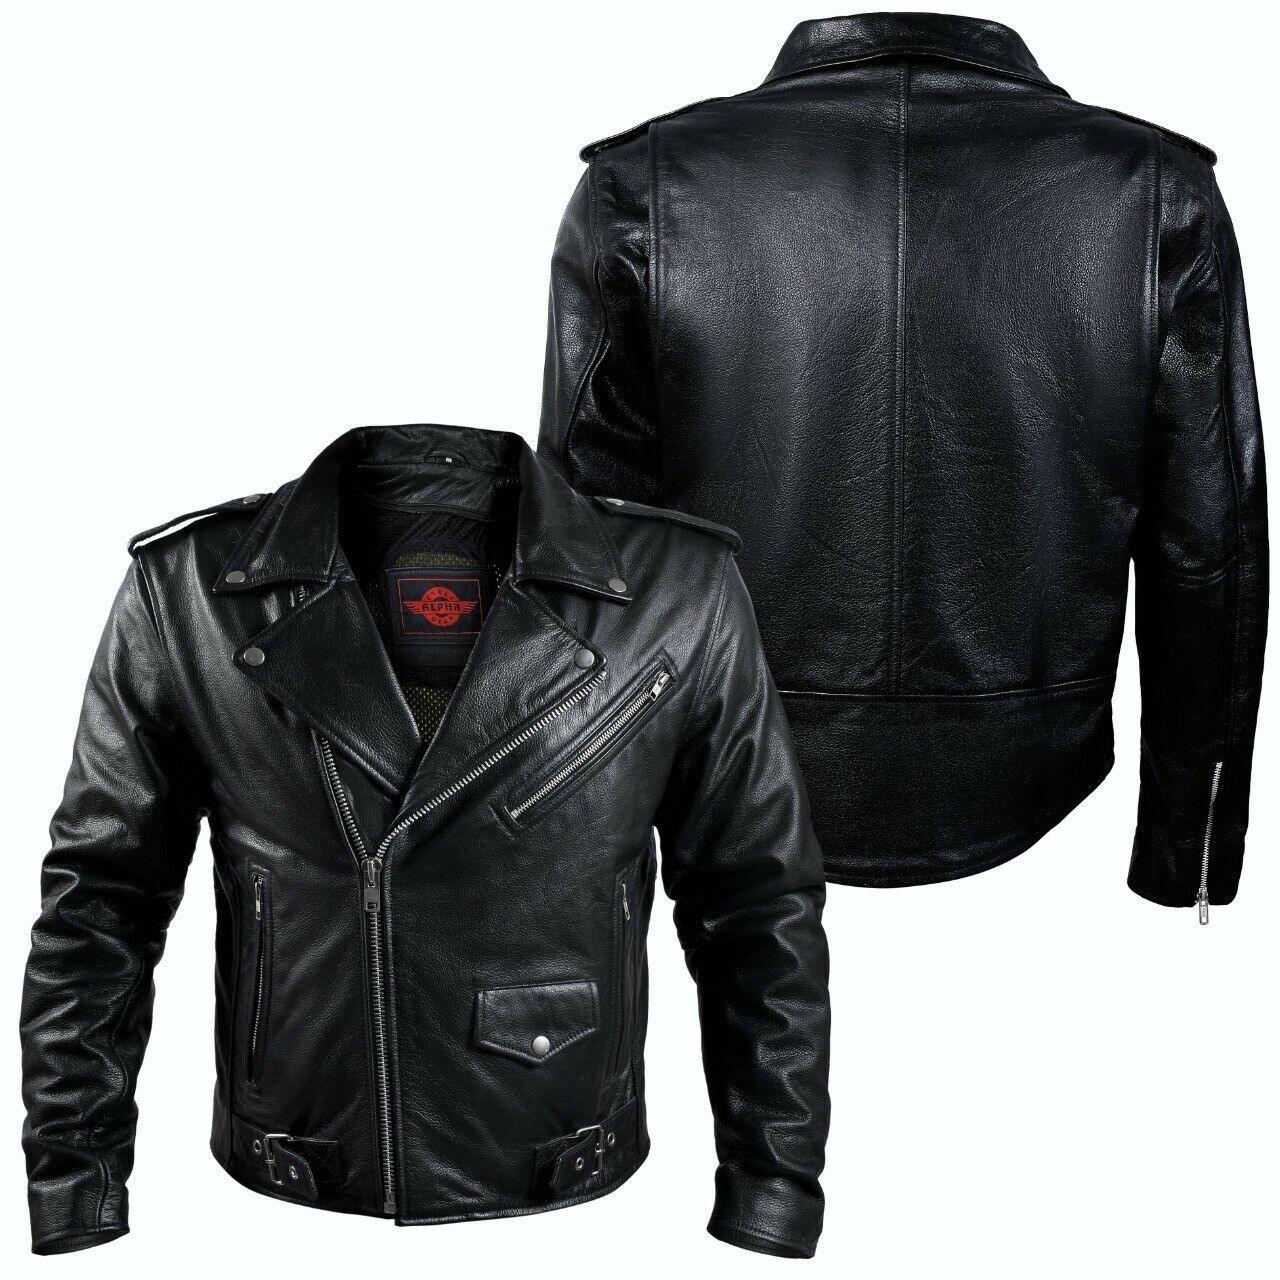 LEATHER ARMOR BIKER MOTORCYCLE JACKET MEN BRANDO CAFE RACER DUAL SPORTS RIDING - Moto Life Products